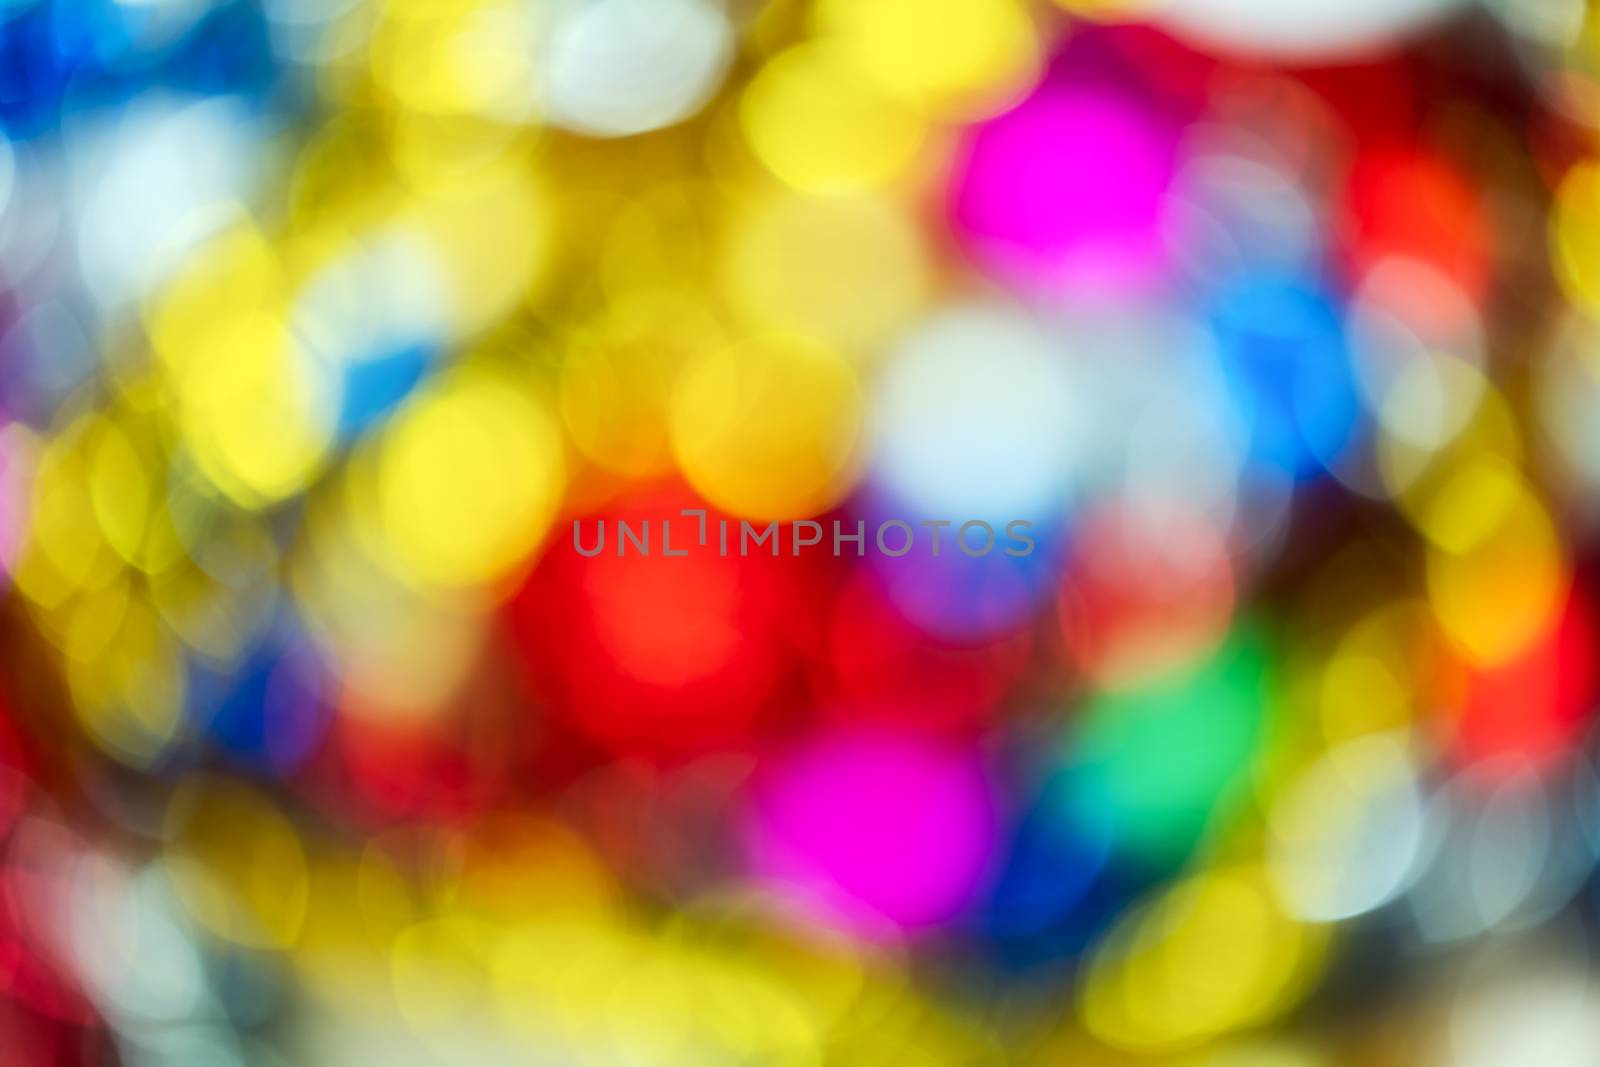 Blurred beautiful Happy New Year holiday decorations, colorful abstract blurry bokeh background effect. Out of focus glowing Christmas lights celebration texture for use at graphic design.